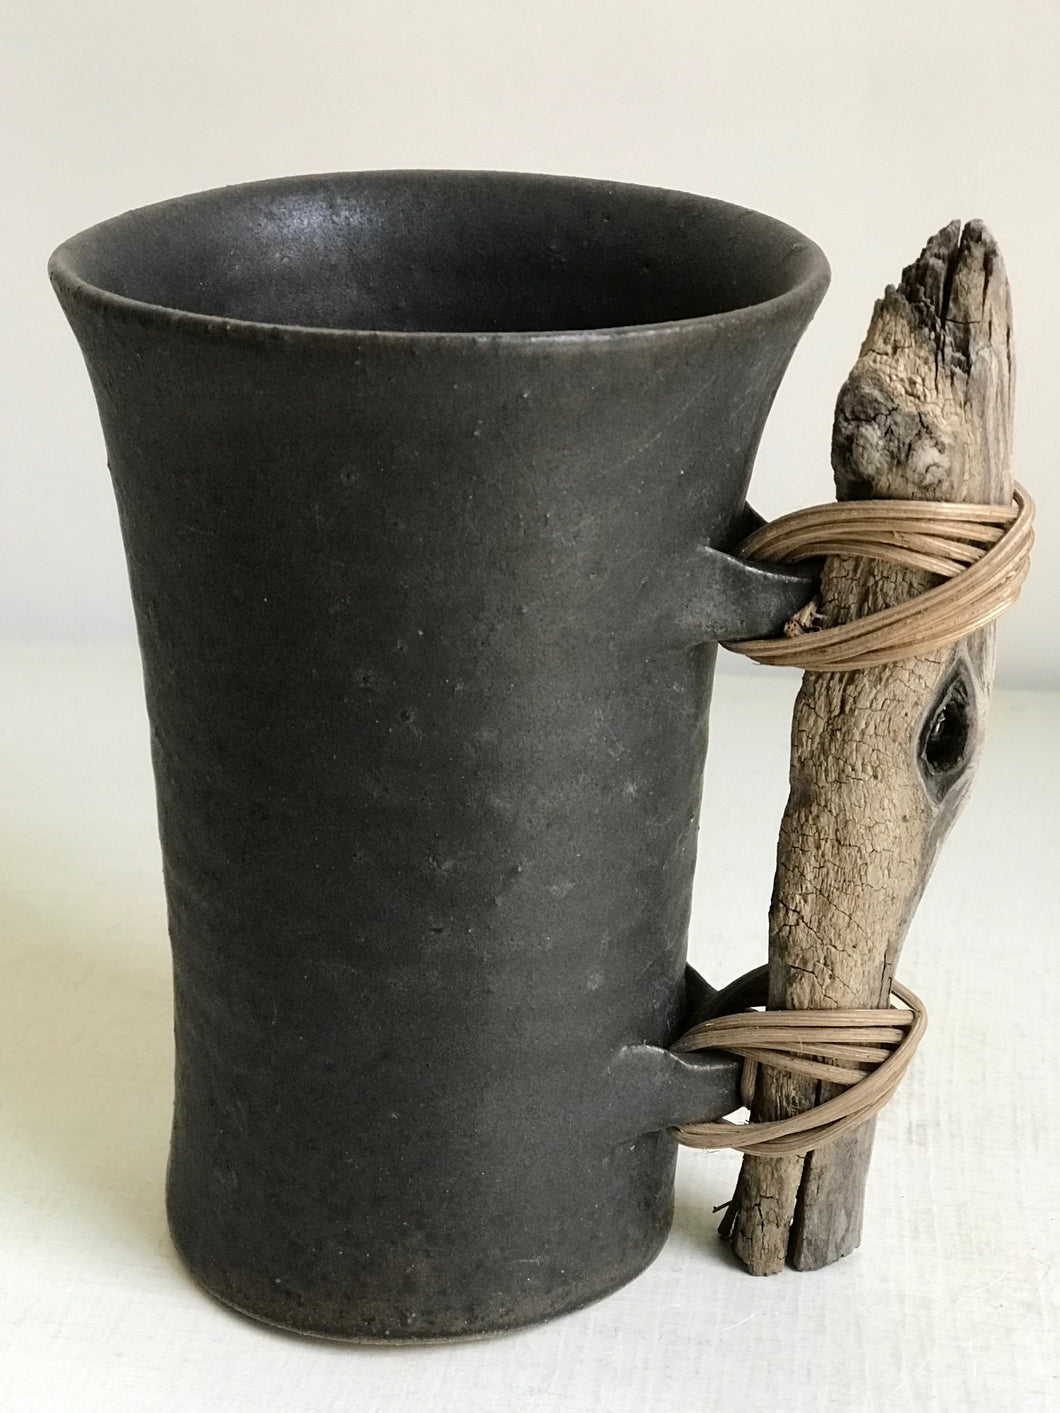 Cup with stick by Anne Fallis Elliot